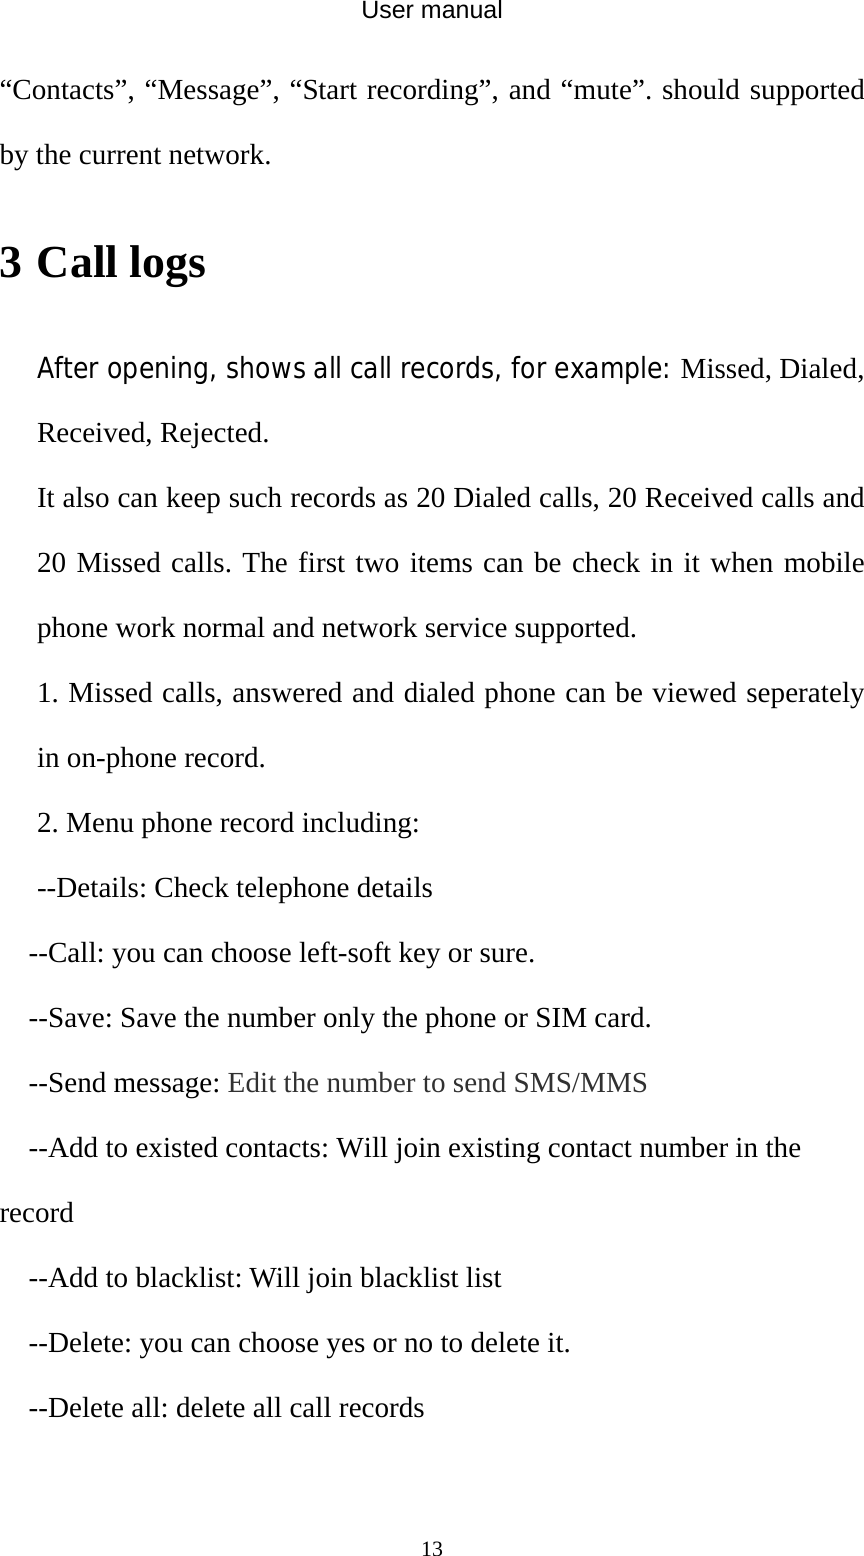 User manual  13“Contacts”, “Message”, “Start recording”, and “mute”. should supported by the current network. 3 Call logs After opening, shows all call records, for example: Missed, Dialed, Received, Rejected. It also can keep such records as 20 Dialed calls, 20 Received calls and 20 Missed calls. The first two items can be check in it when mobile phone work normal and network service supported. 1. Missed calls, answered and dialed phone can be viewed seperately in on-phone record. 2. Menu phone record including: --Details: Check telephone details --Call: you can choose left-soft key or sure. --Save: Save the number only the phone or SIM card. --Send message: Edit the number to send SMS/MMS --Add to existed contacts: Will join existing contact number in the record --Add to blacklist: Will join blacklist list --Delete: you can choose yes or no to delete it. --Delete all: delete all call records  